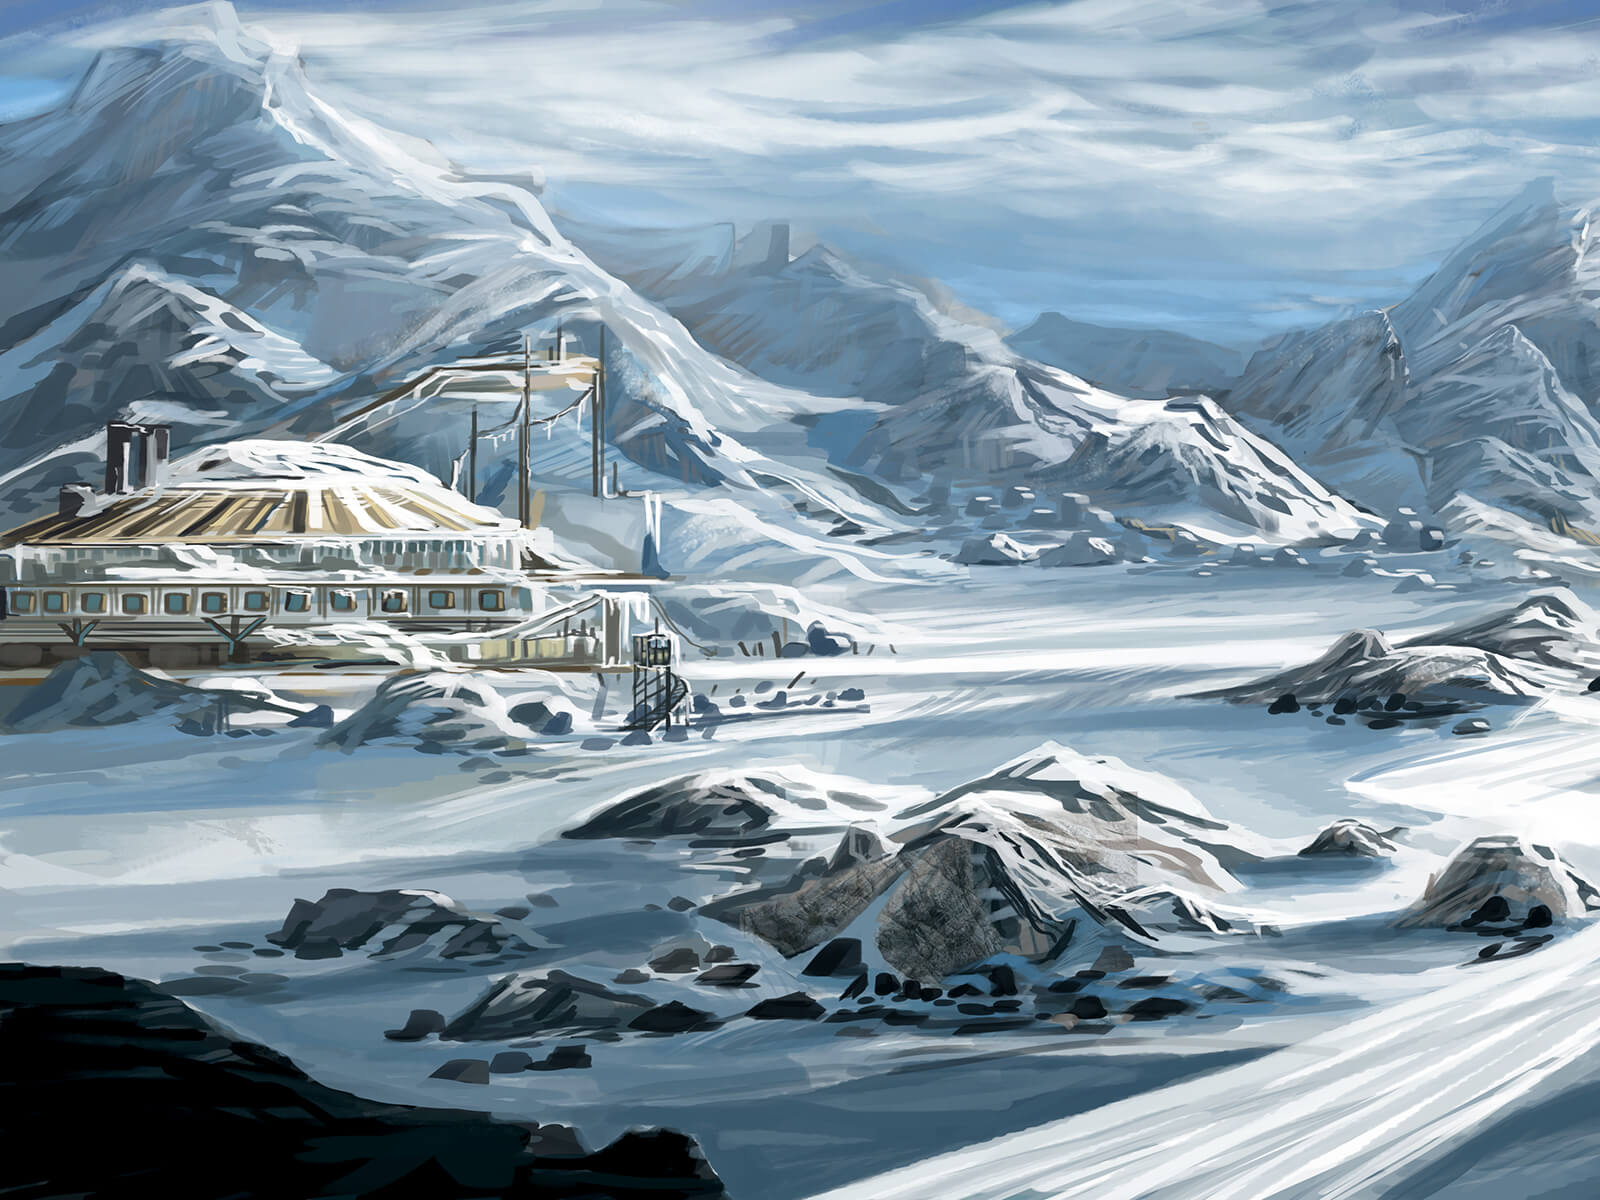 A remote research station and campsite at the base of an icy mountain range, seemingly devoid of activity.